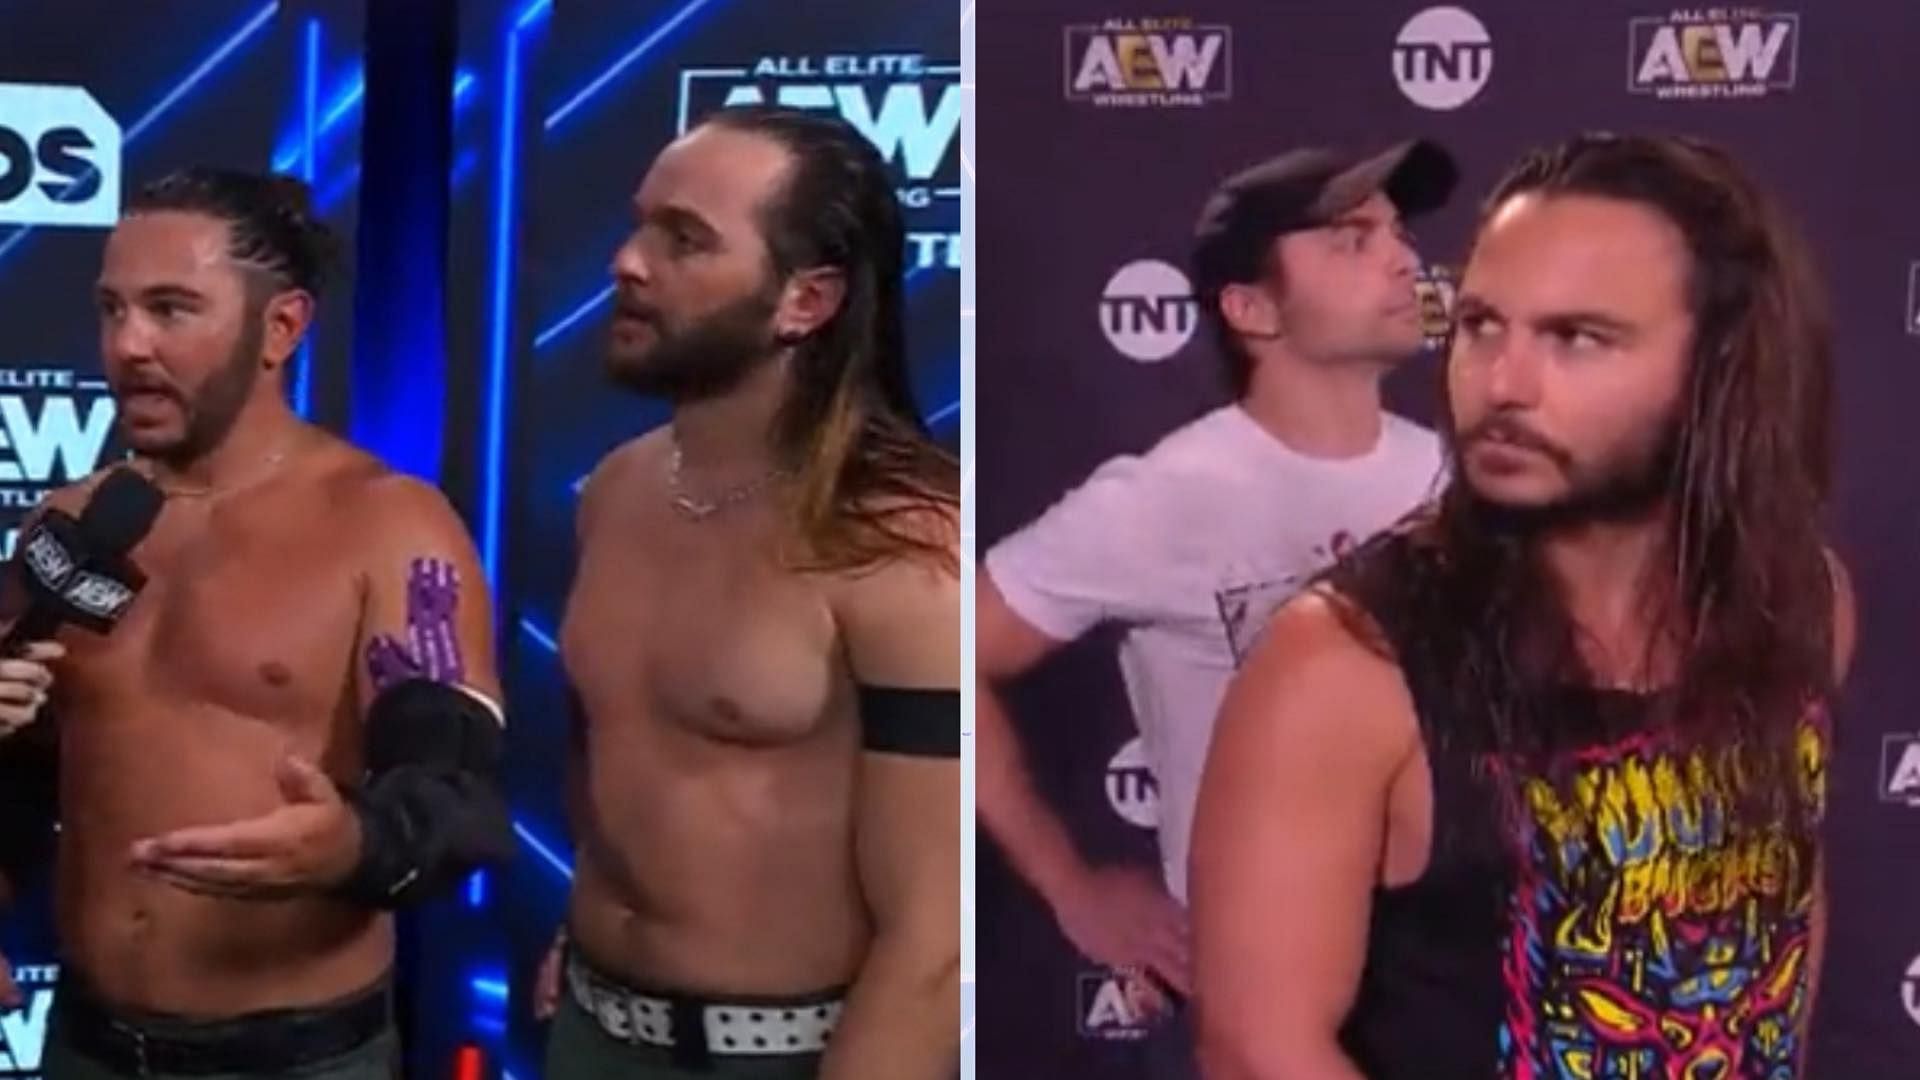 The Young Bucks are the current AEW World Tag Team Champions